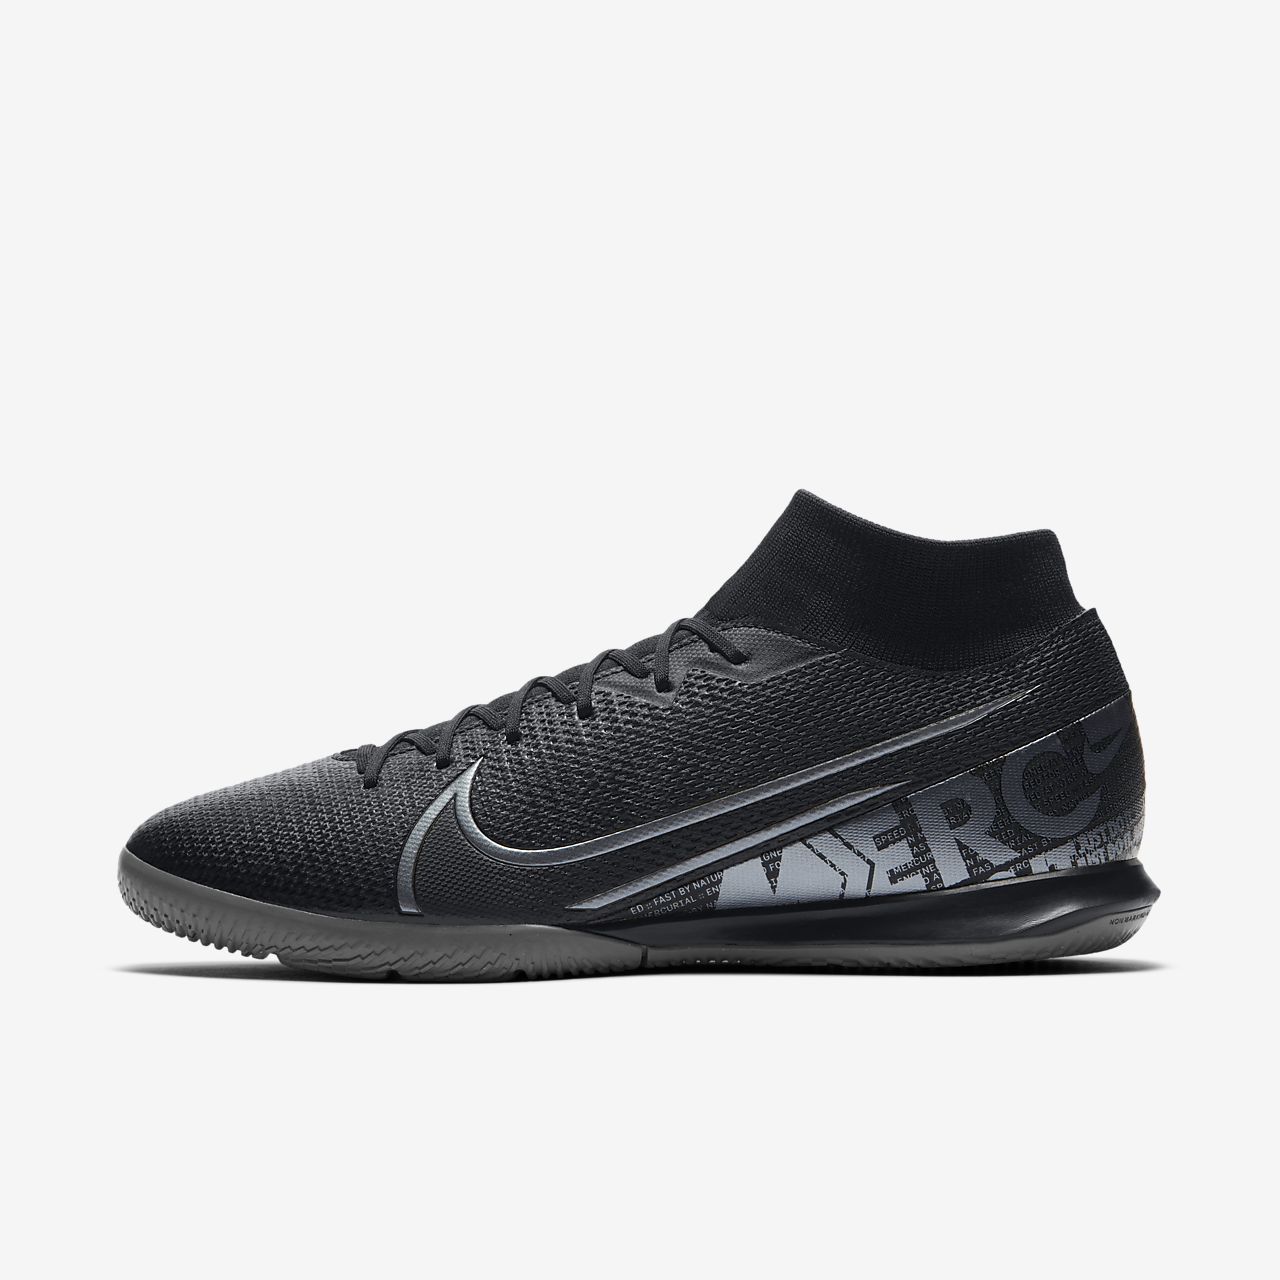 NIKE MEN 'S MERCURIAL SUPERFLY 7 ACADEMY MDS MG.